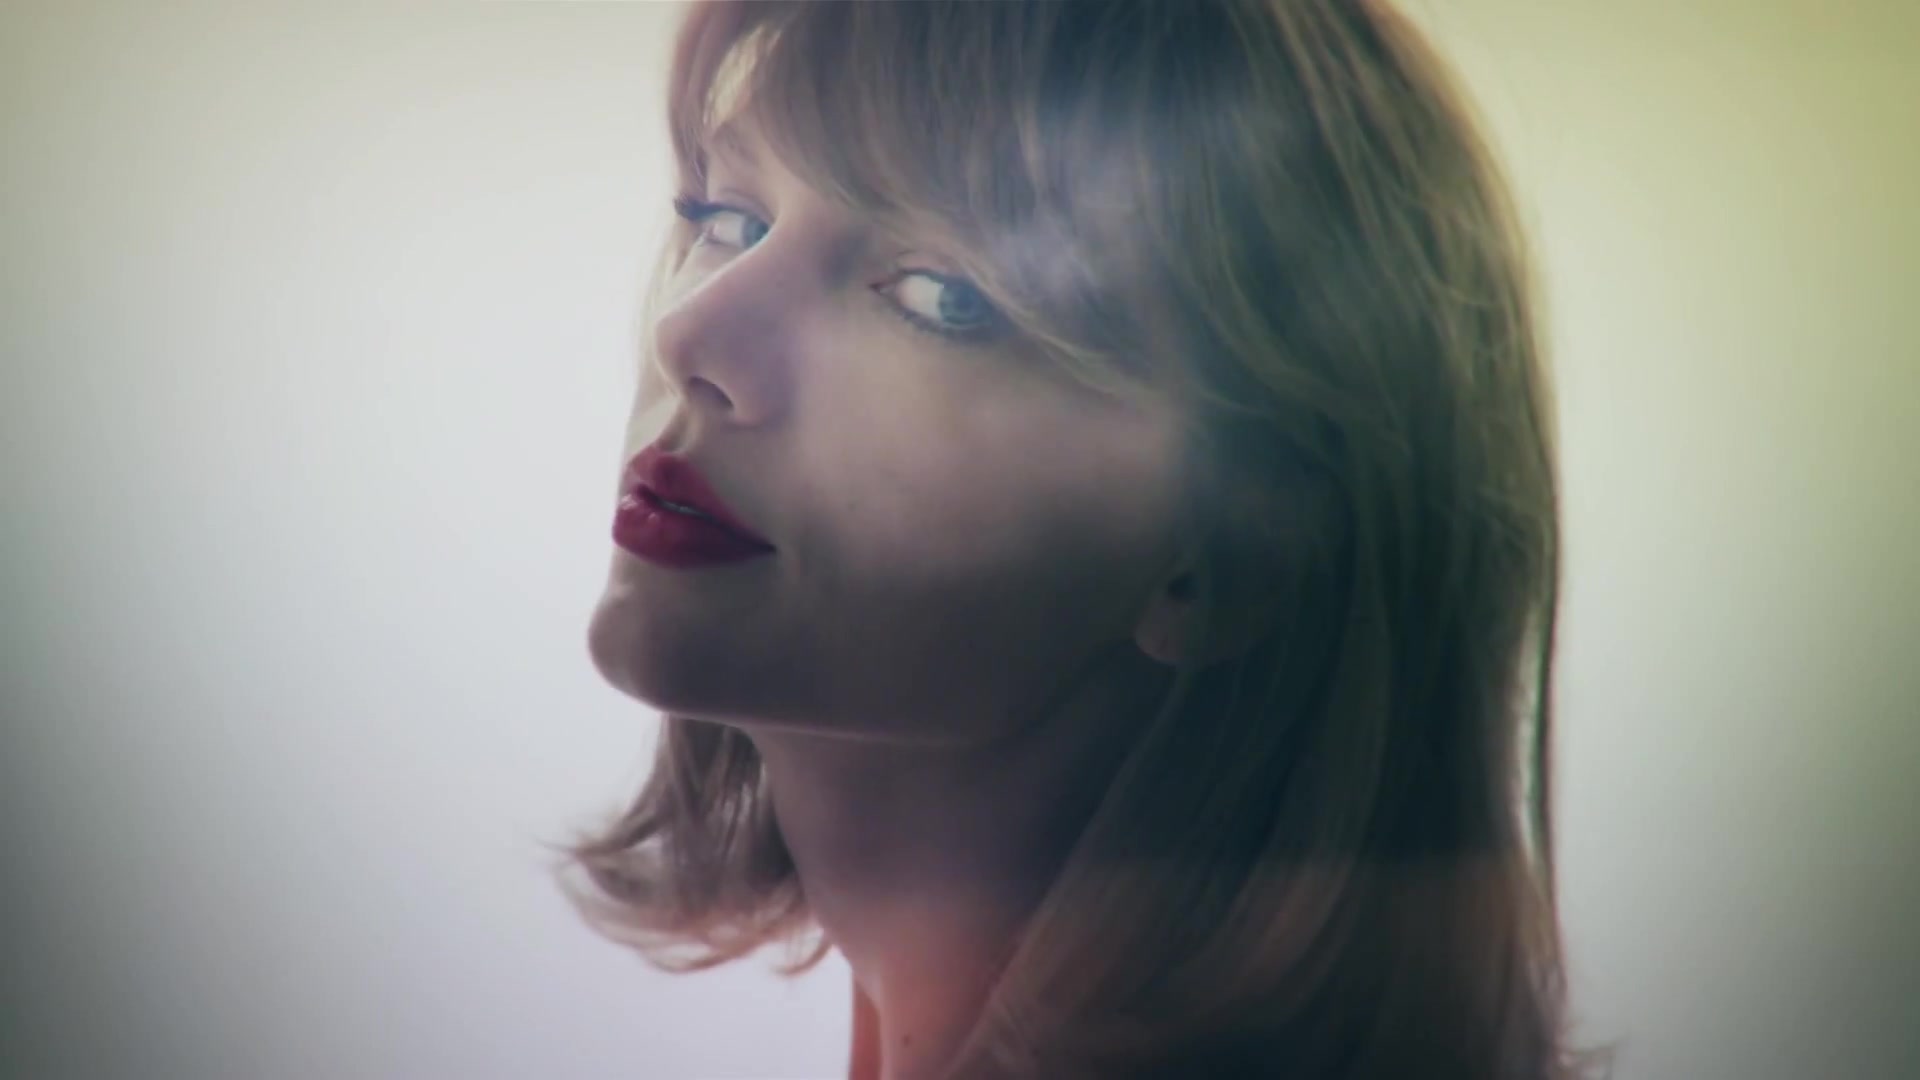 Screen Captures 176 Taylor Swift Web Photo Gallery Your Online Source For Taylor Swift